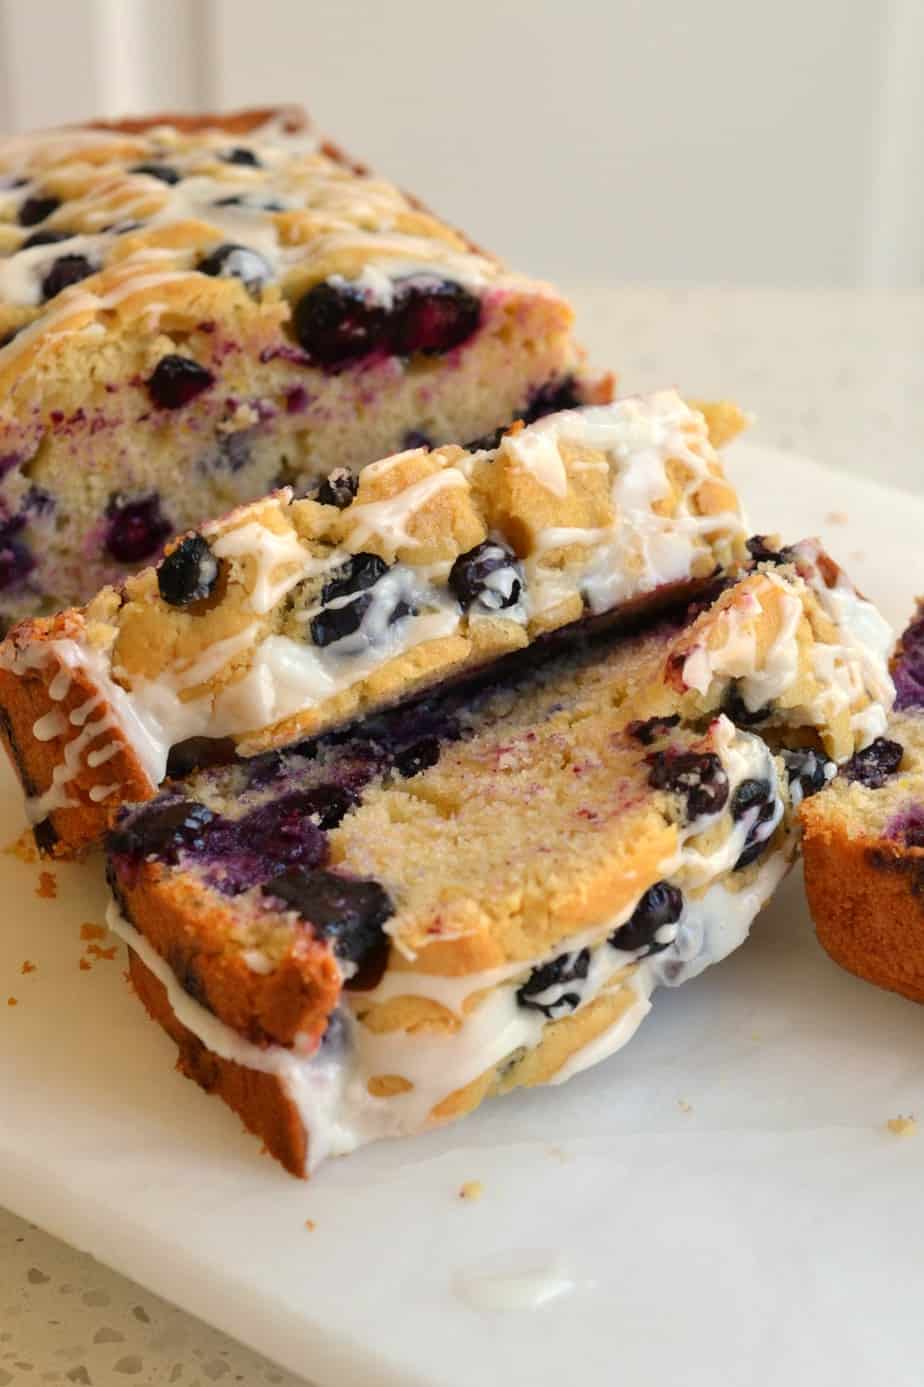 Easy family friendly Lemon Blueberry Bread is drizzled with a two ingredient sweet lemon glaze.